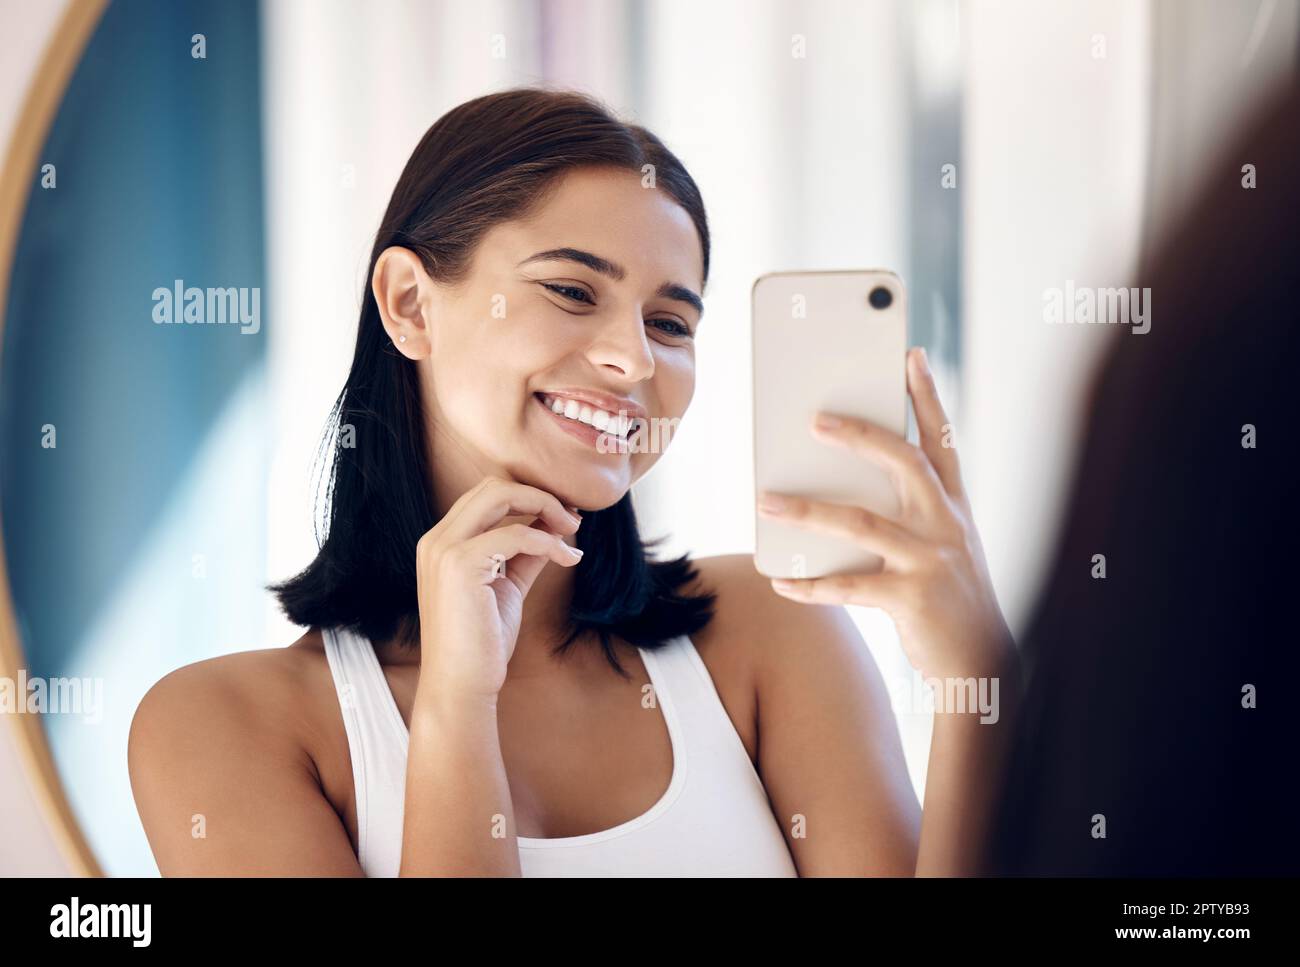 Mirror selfie, happy woman and phone, beauty and skincare in bathroom of home. Smile young girl taking photograph in reflection, mobile and social med Stock Photo